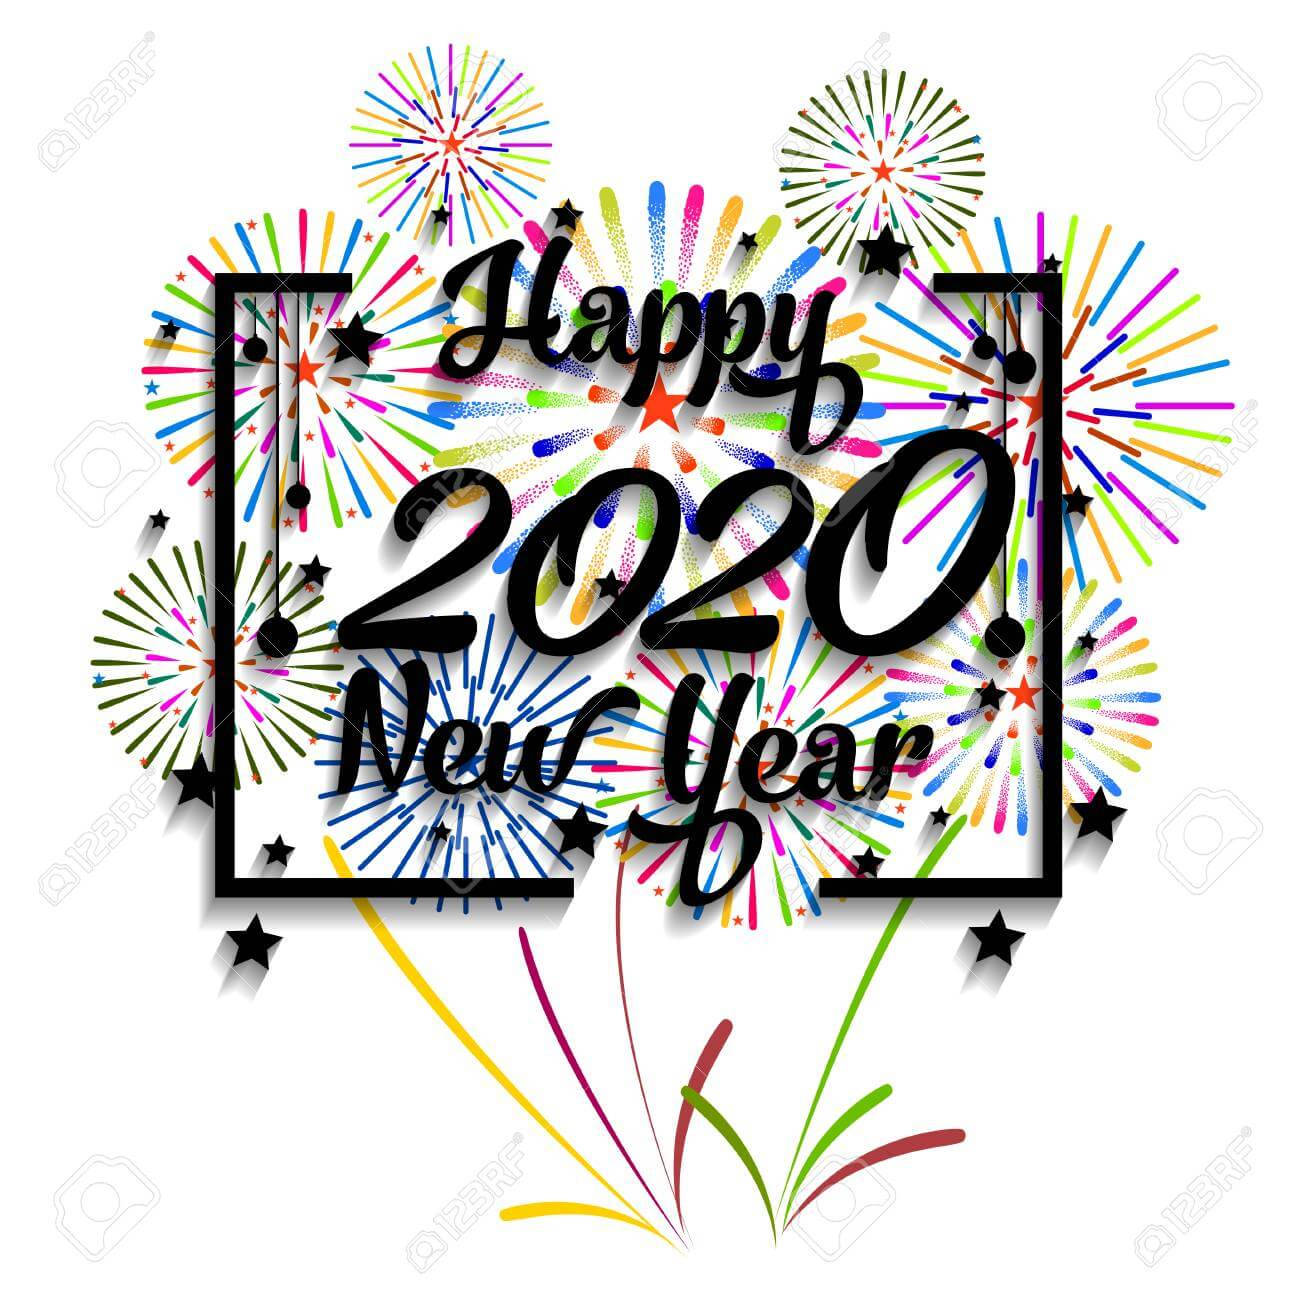 Wish You Happy and Prosperous New Year 2020! Wallpaper